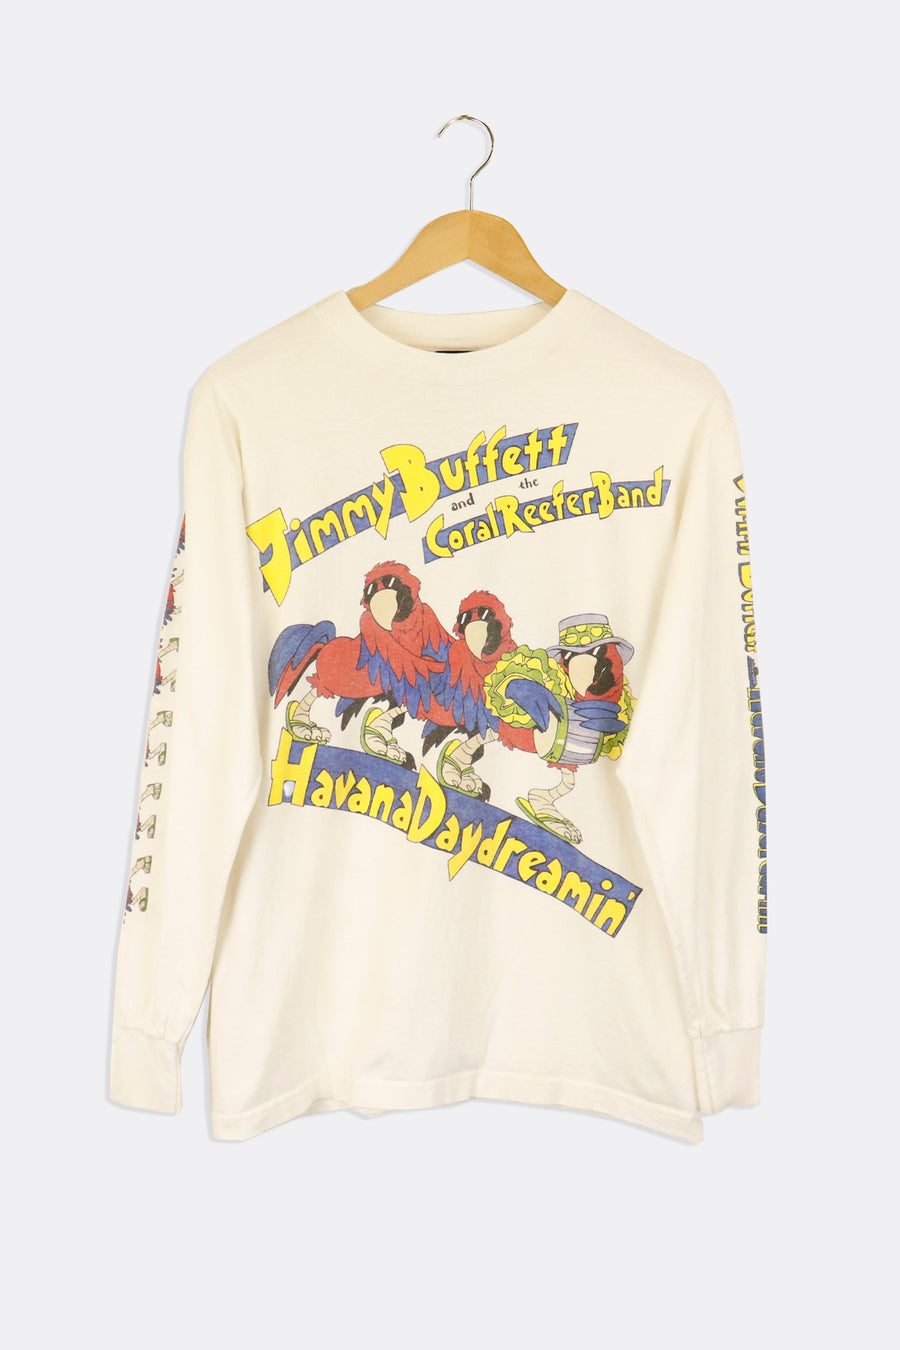 Vintage 1997 Jimmy Buffet And The Coral Reefers Havana Daydreaming Tour Longsleeve T Shirt